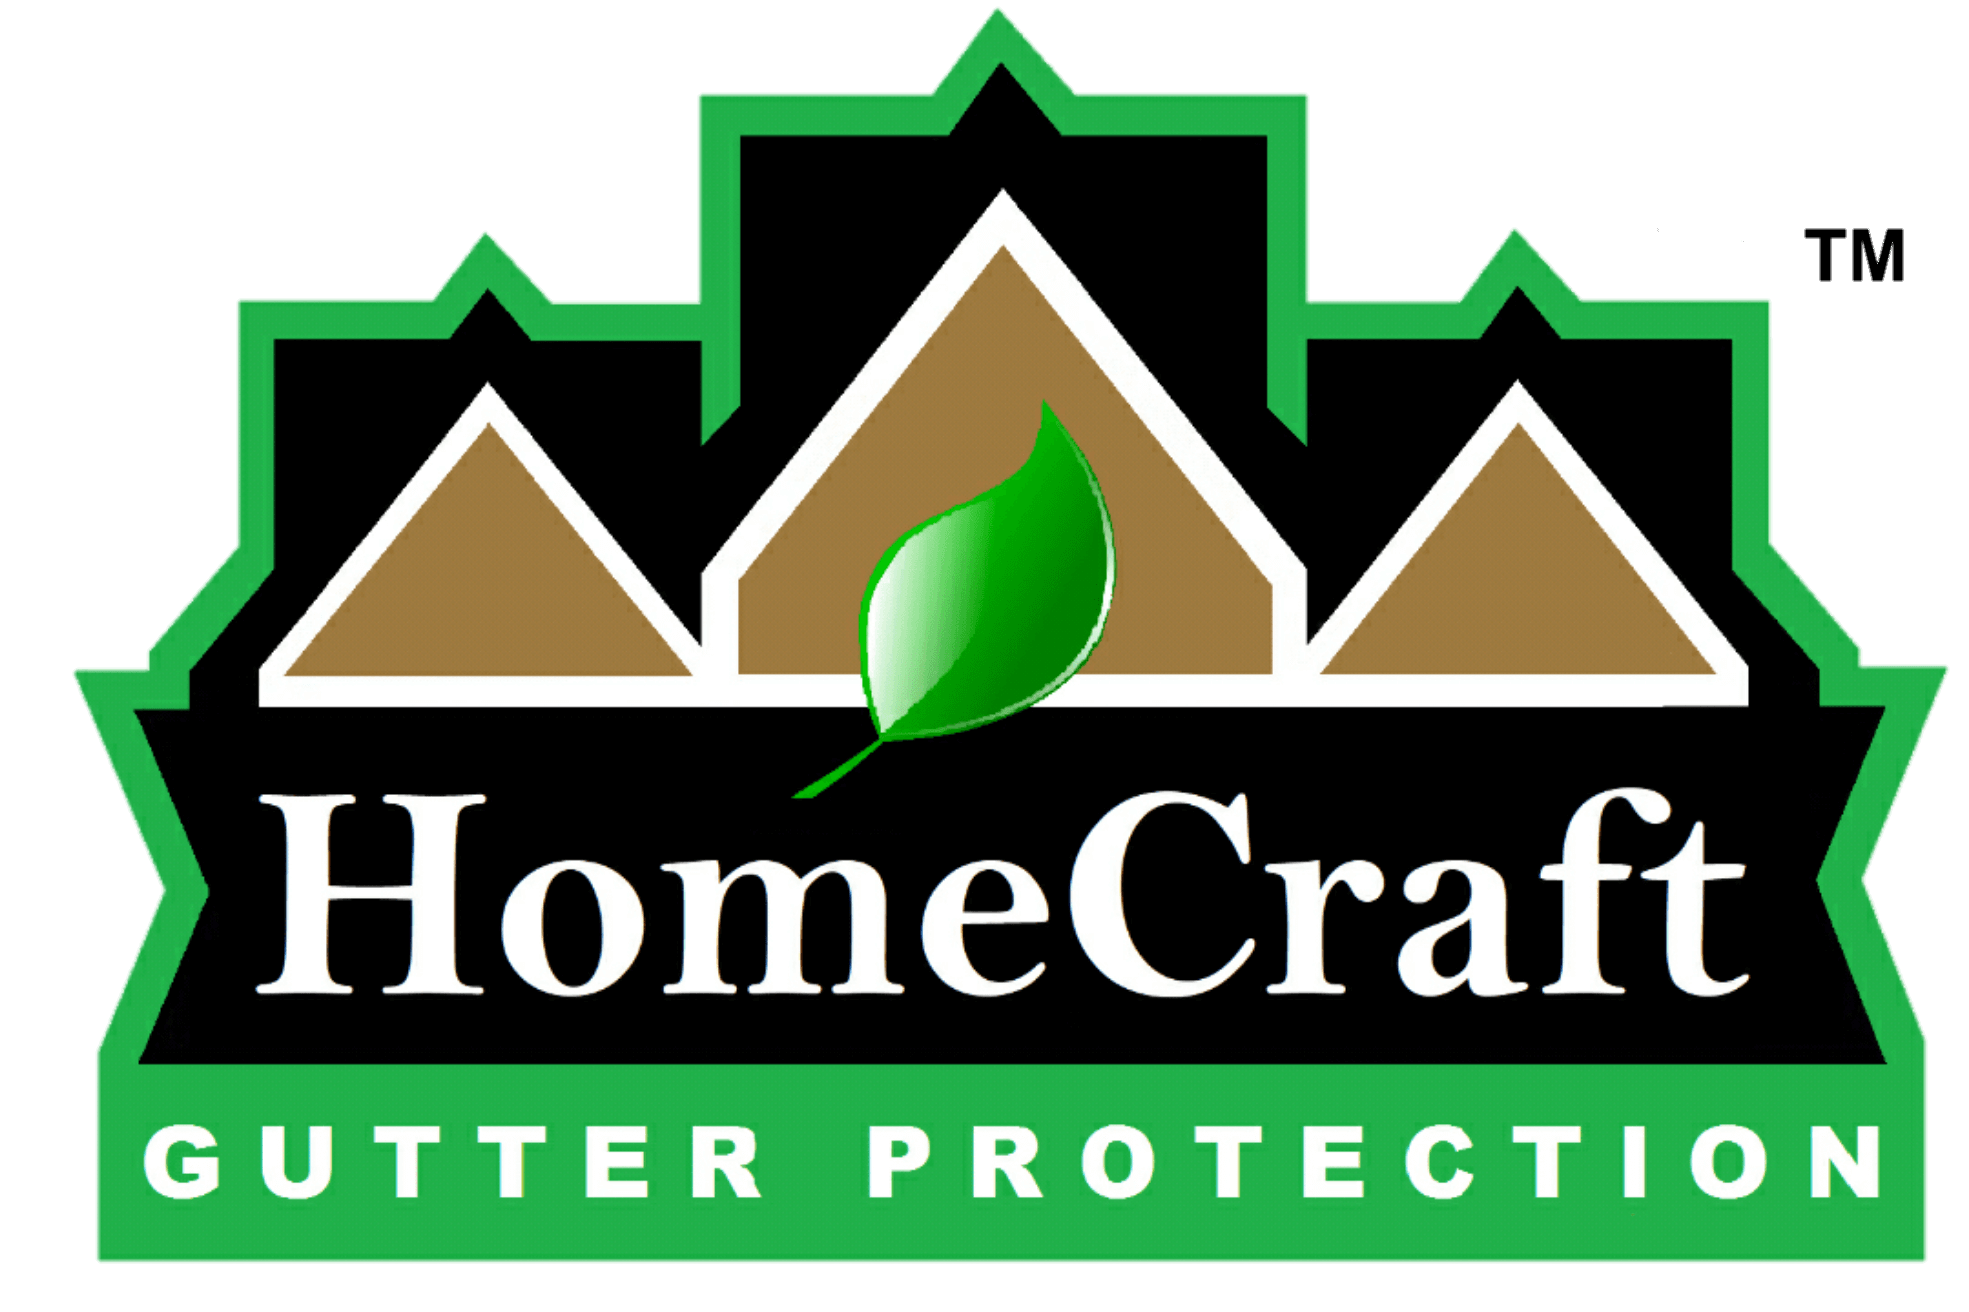 HomeCraft Gutter coupon and promo code